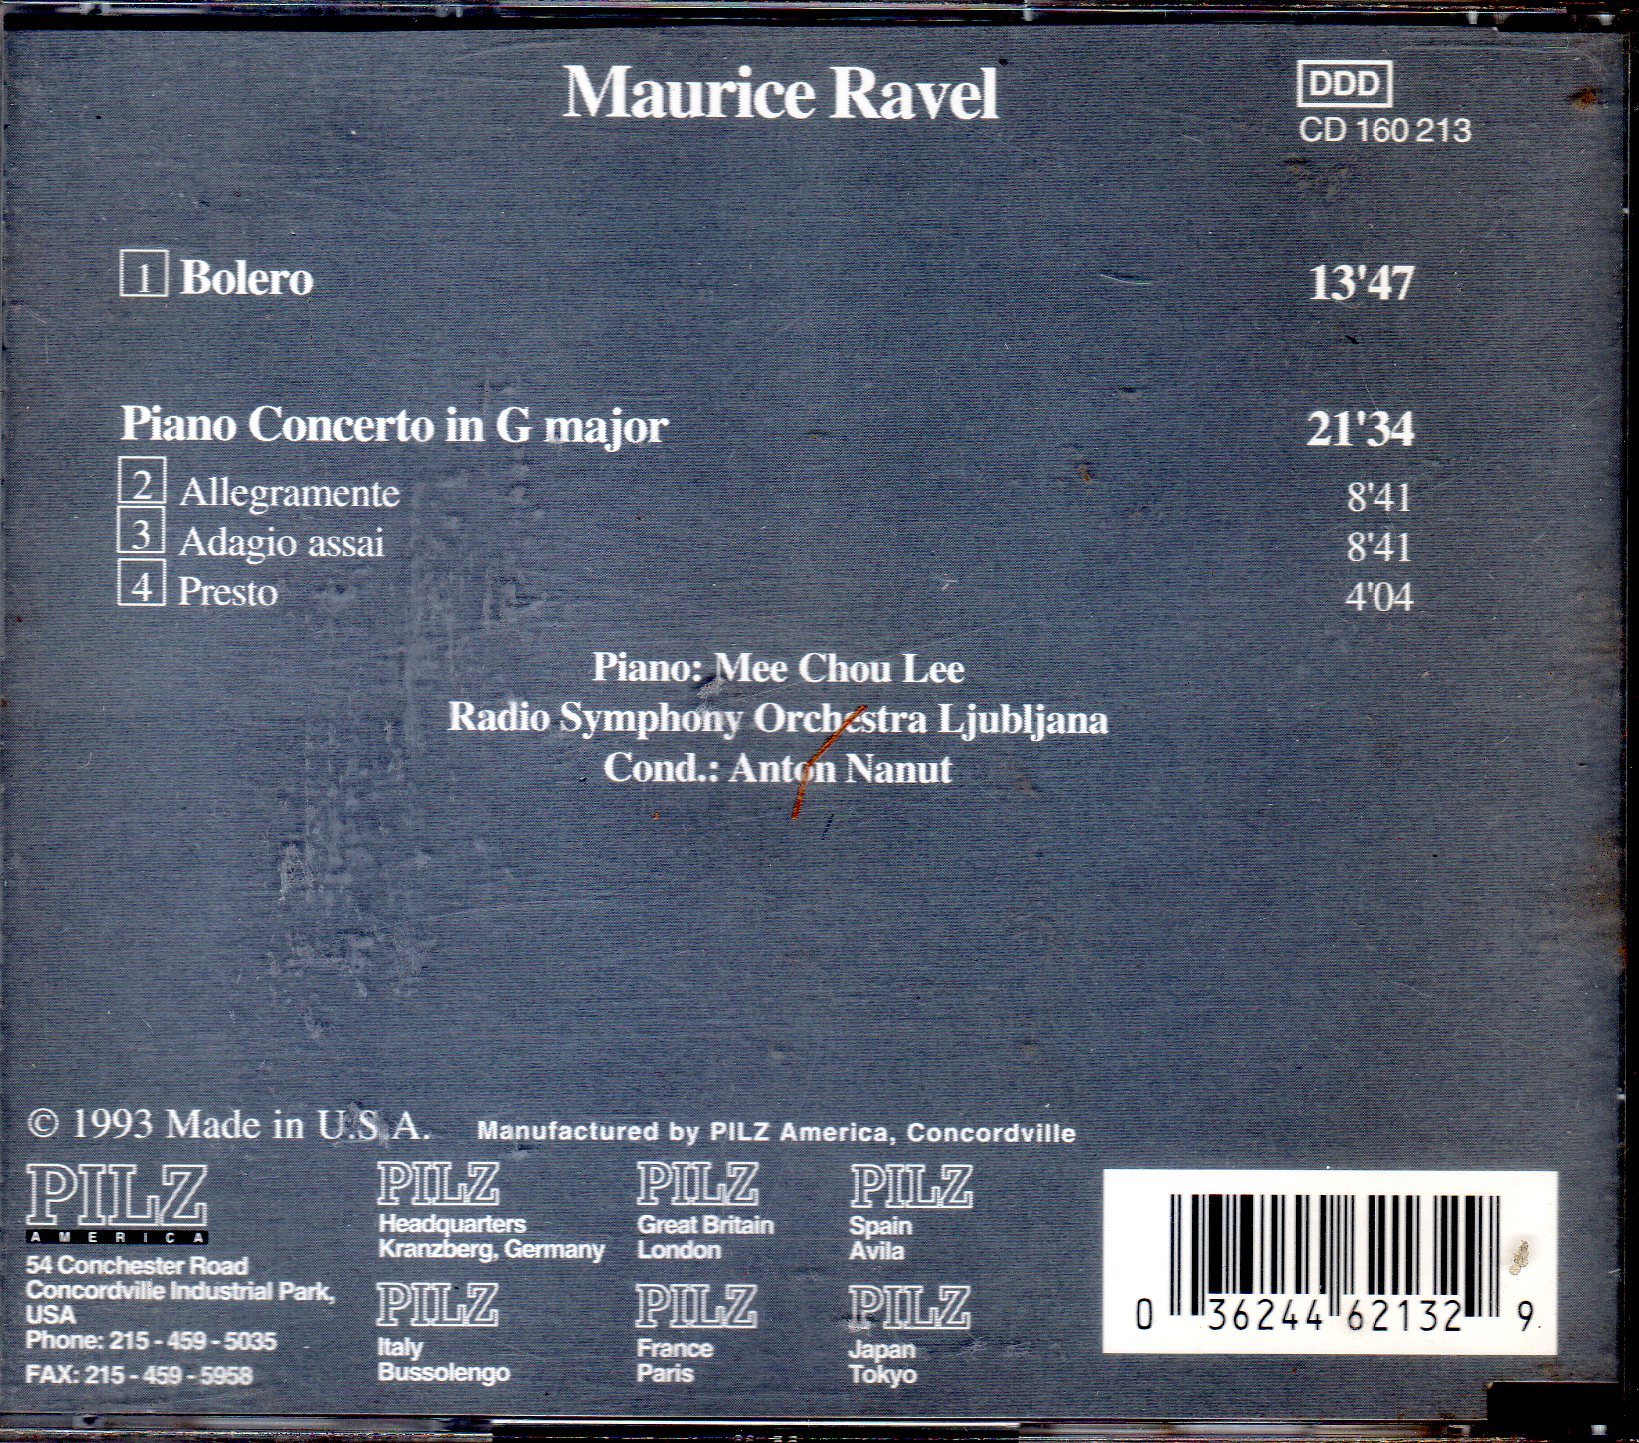 MAURICE RAVEL: Bolero & Piano concert in G major. Mee Chou Lee, piano.  ANTON NANUT, cond. (PRIVATE COLLECTION) * 2 ITEMS MINIMUM FOR INTERNATIONAL  ORDERS FROM USA. ONLY $ FEE PER ADDITIONAL